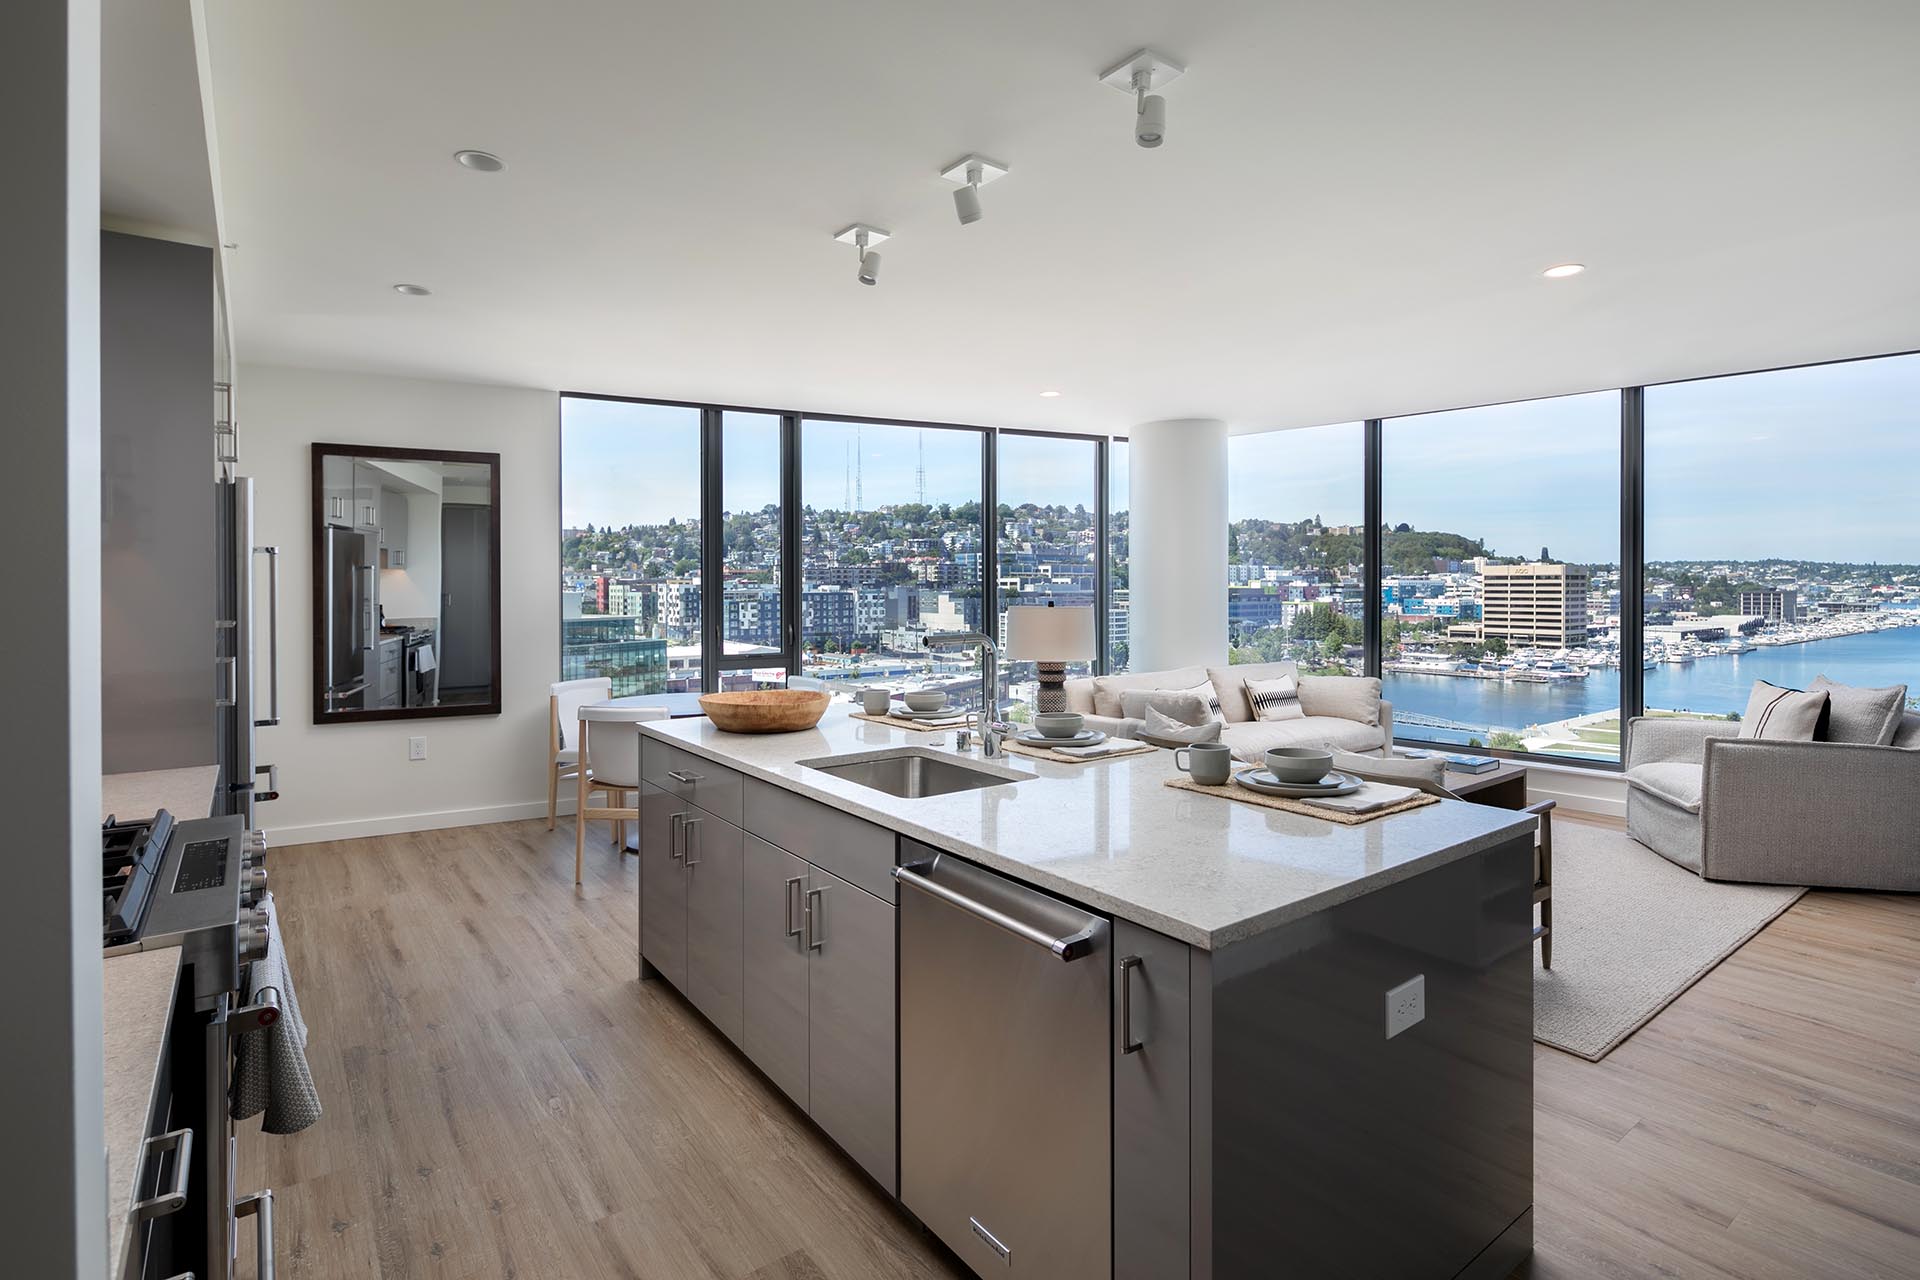 Angle view of kitchen landing area with nice view of city through windows